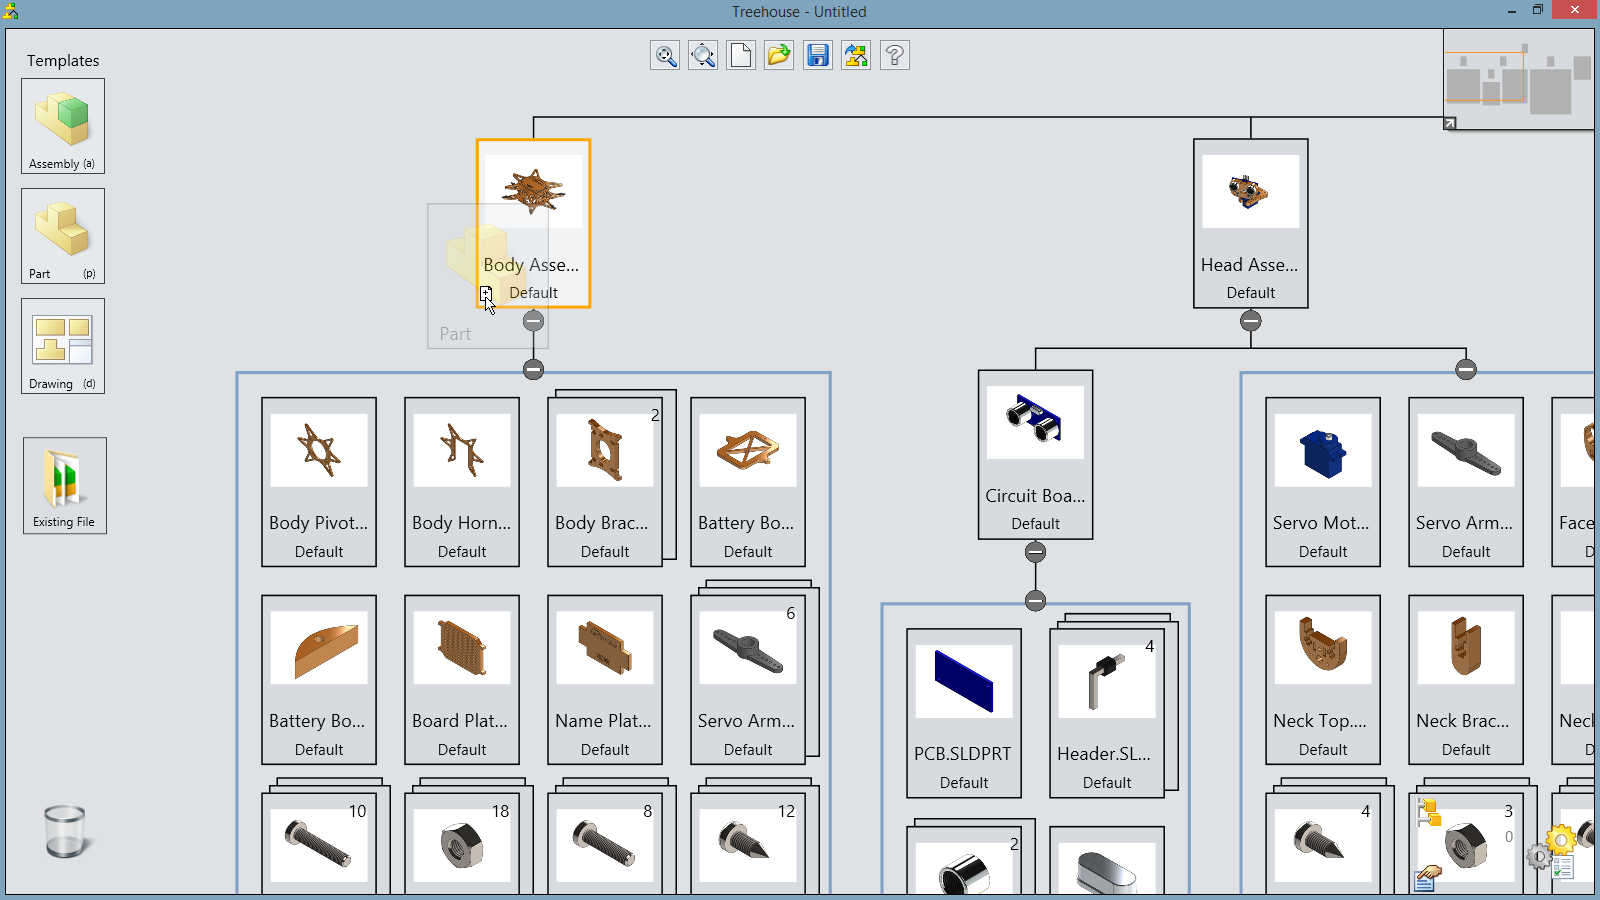 Sneak Peek: 15 Features coming in SOLIDWORKS 2015 – Treehouse